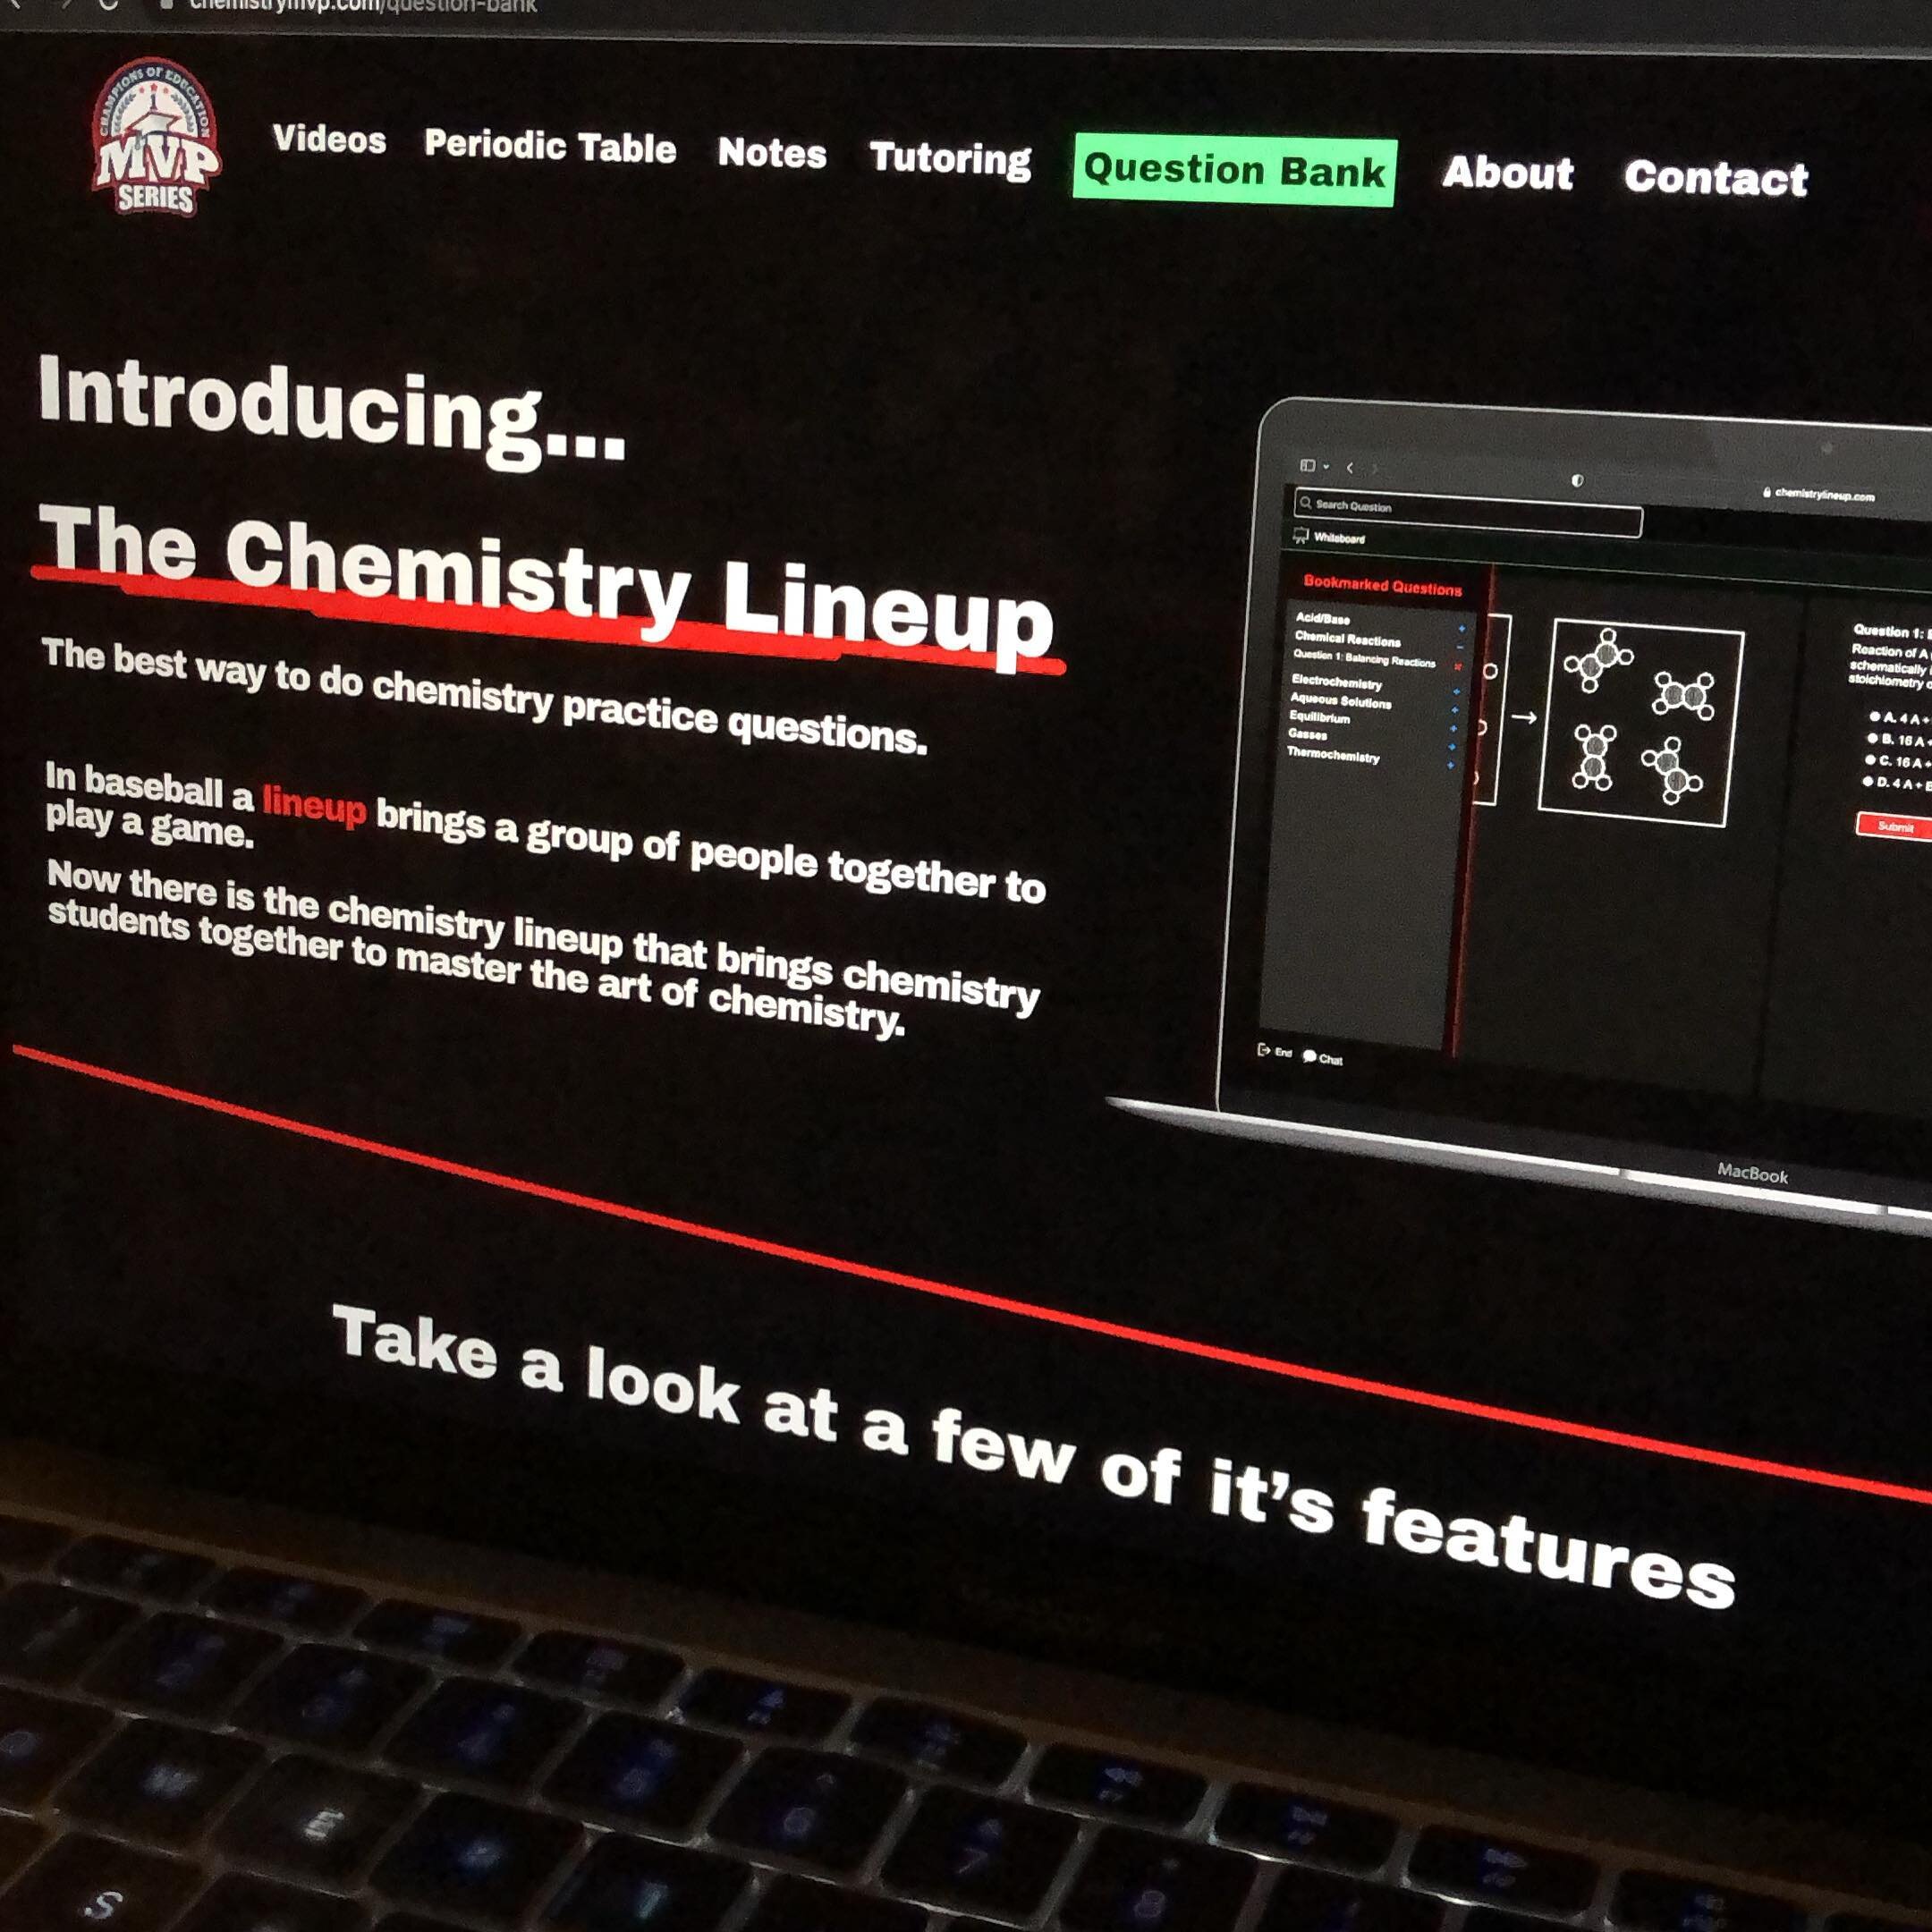 Well it&rsquo;s finally here! The Chemistry Lineup! With lots of chemistry practice questions. Check it out at ChemistryMVP.com